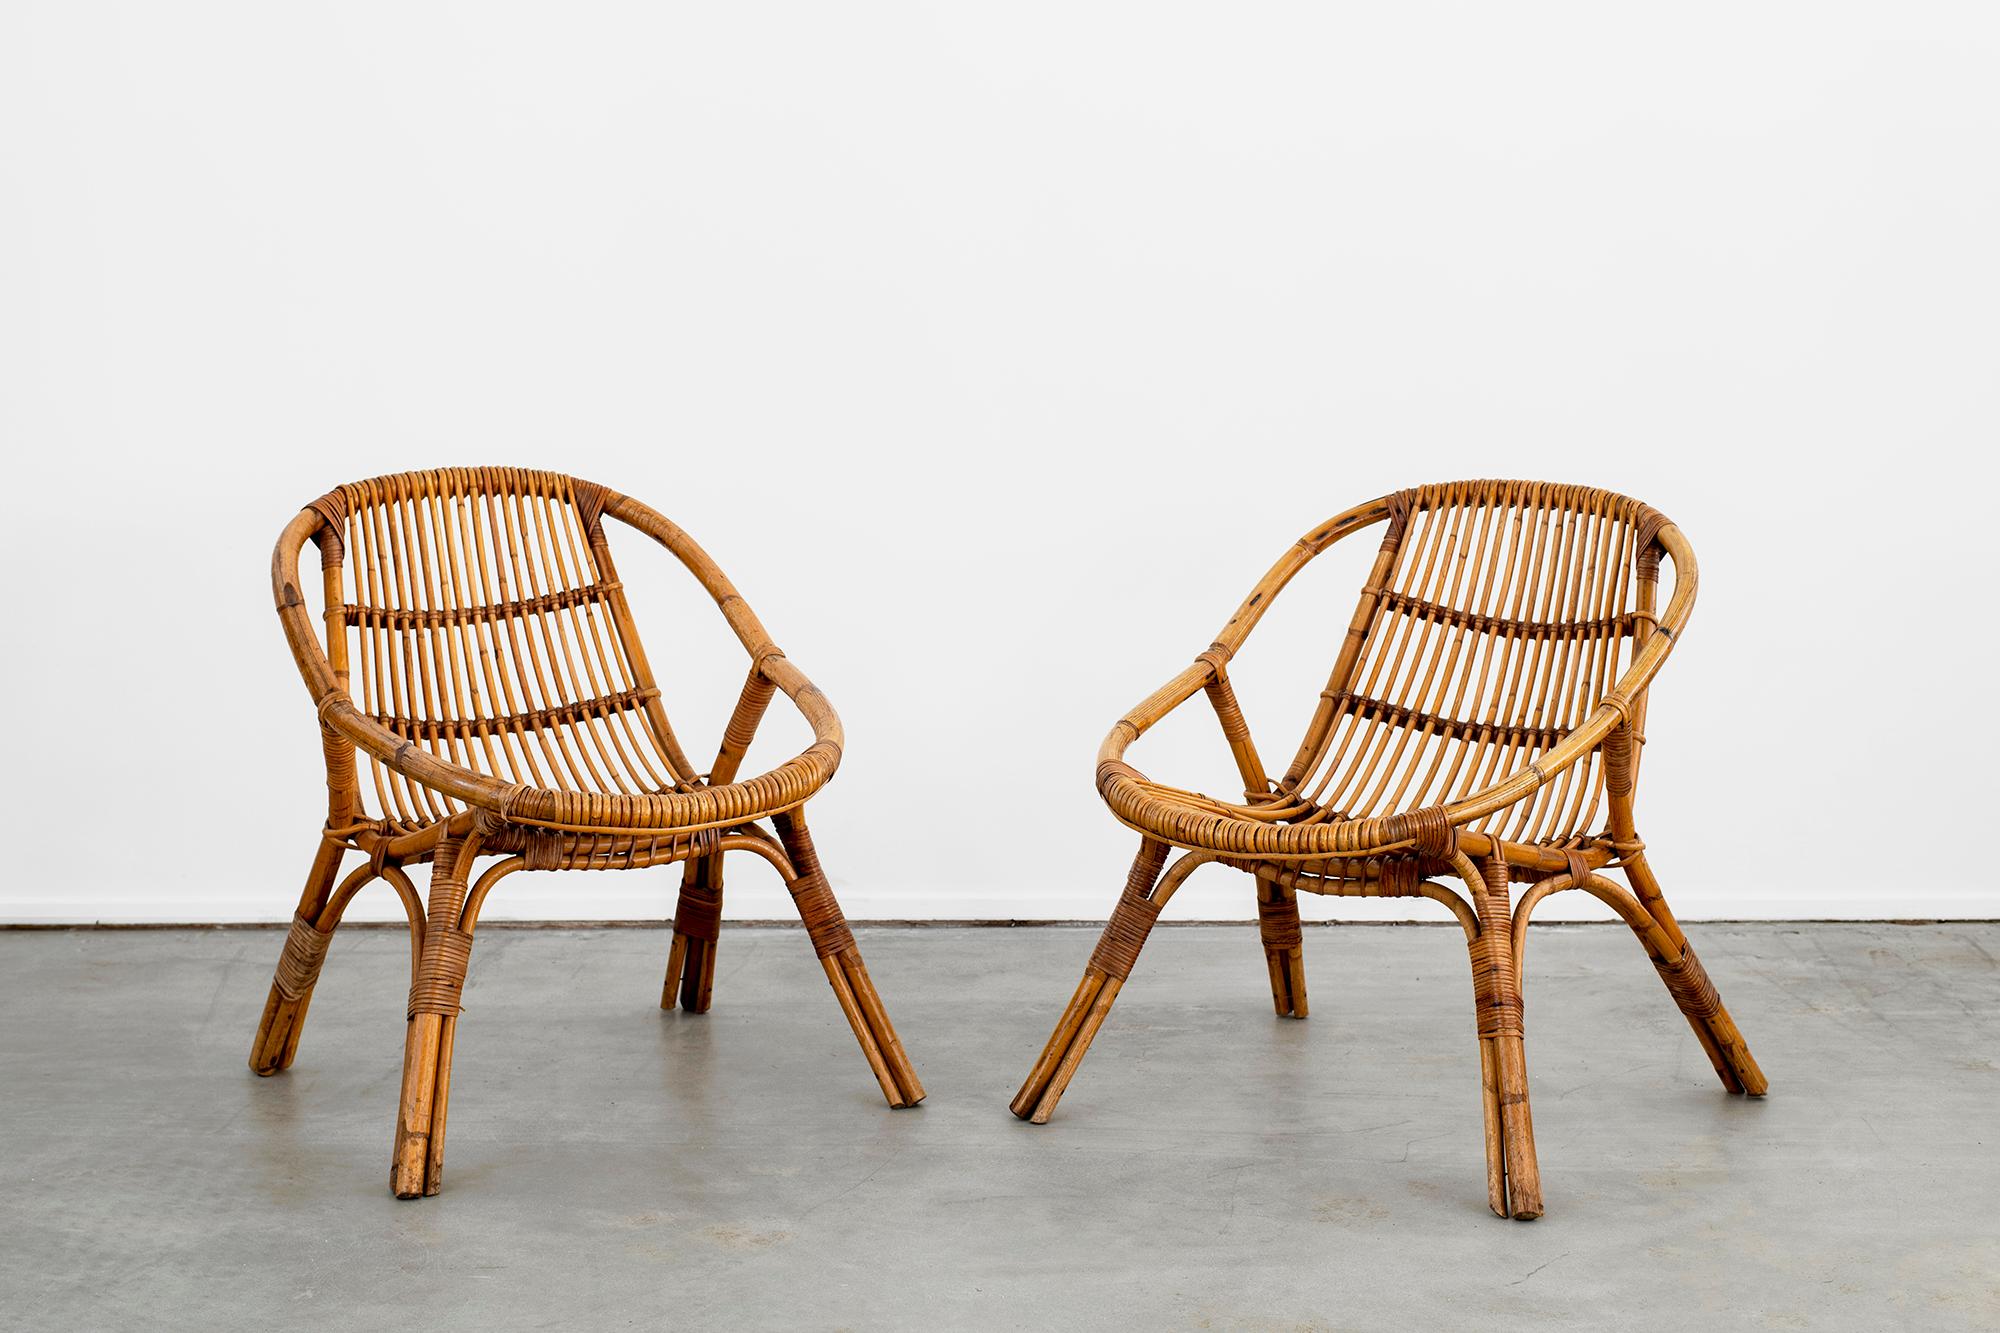 Sculptural pair of Italian rattan chairs with wonderful scoop shape.